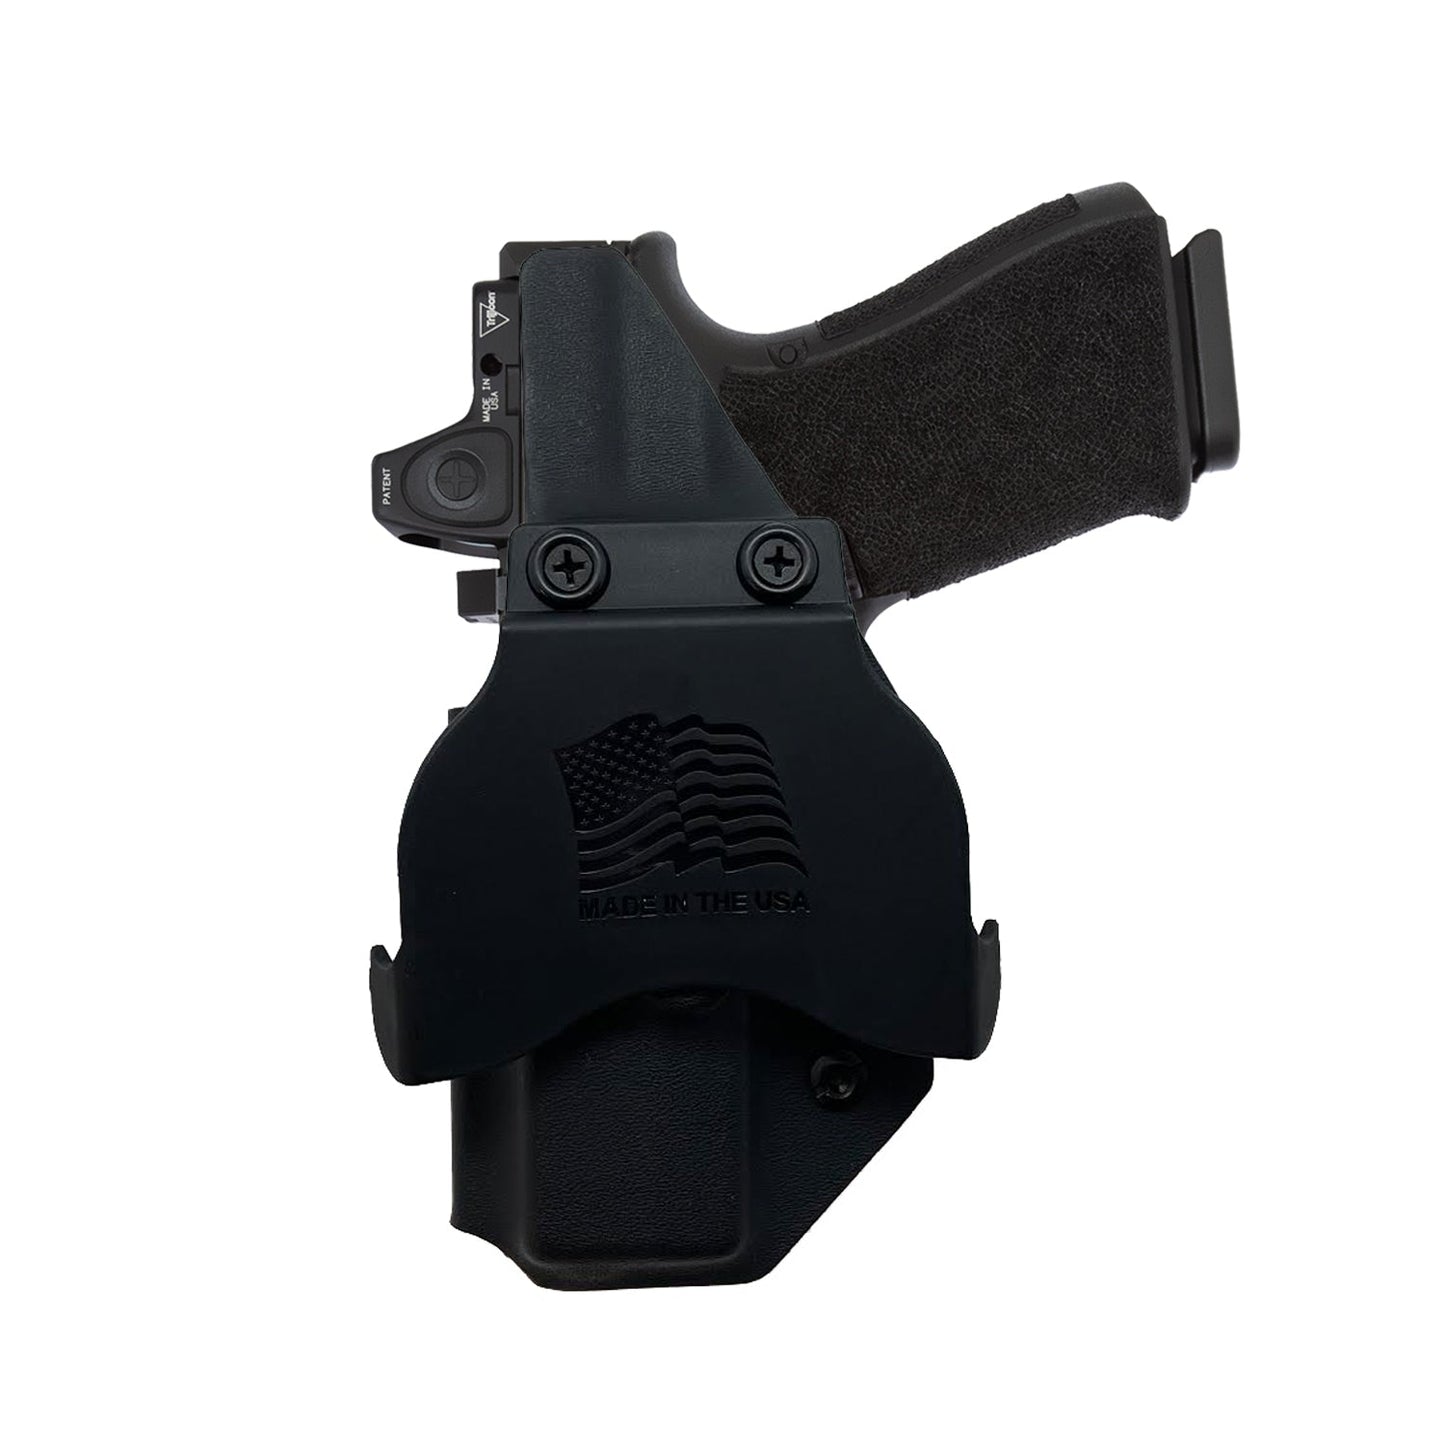 Hellcat PRO With TLR6 Light OWB (Outside The Waistband Holster)